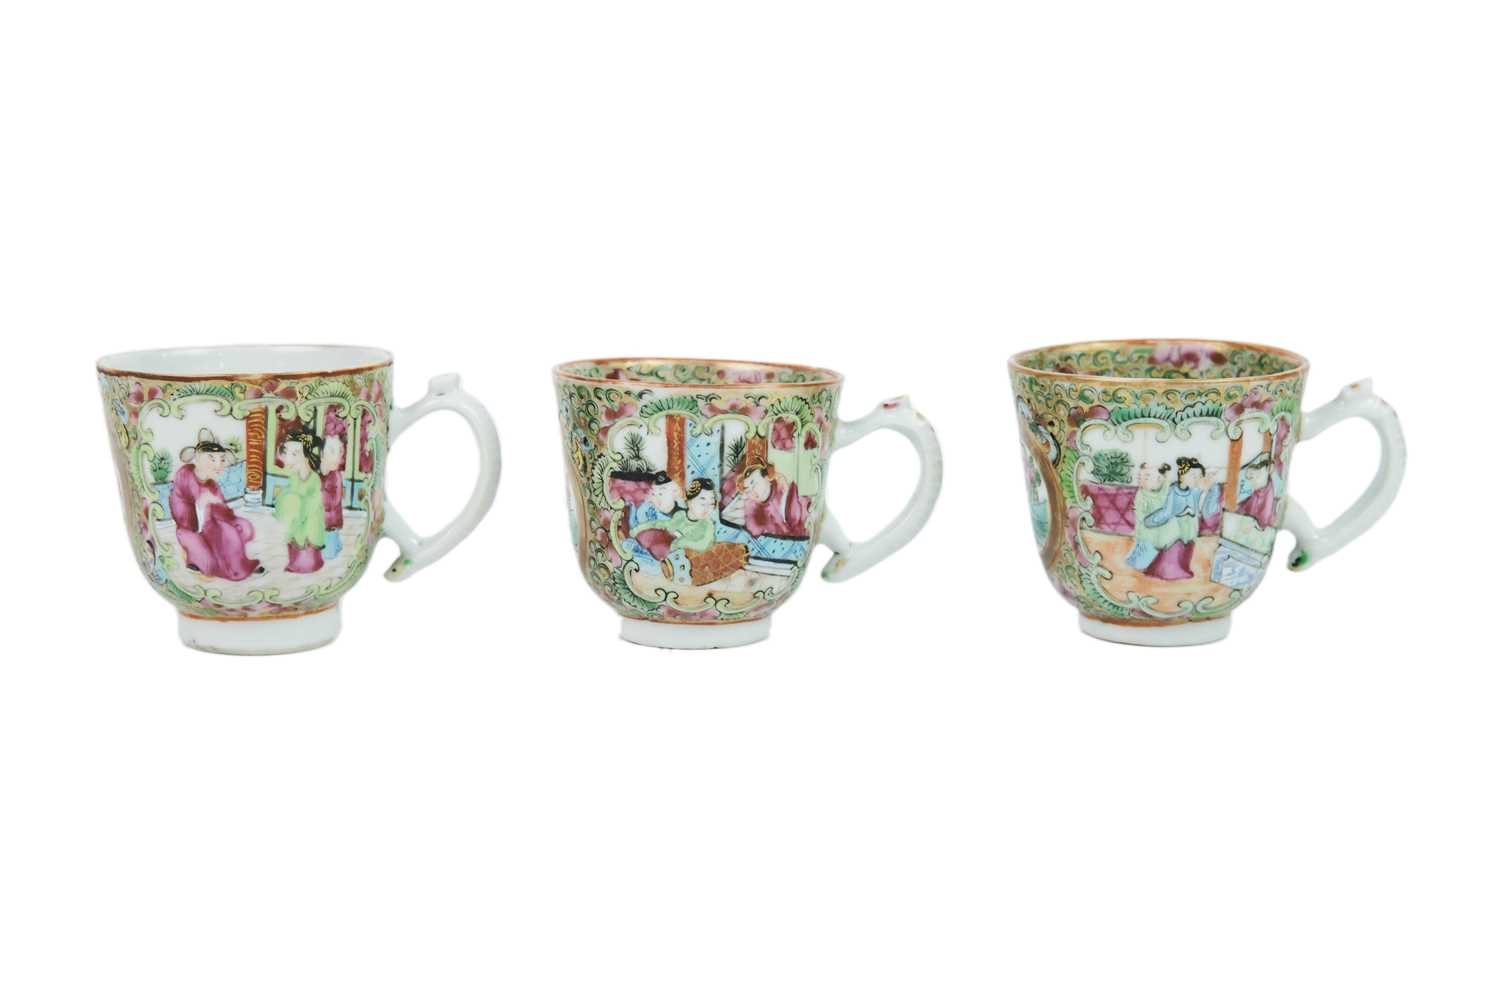 Seven Chinese famille rose porcelain cups and two saucer dishes, 18th century. - Image 4 of 5